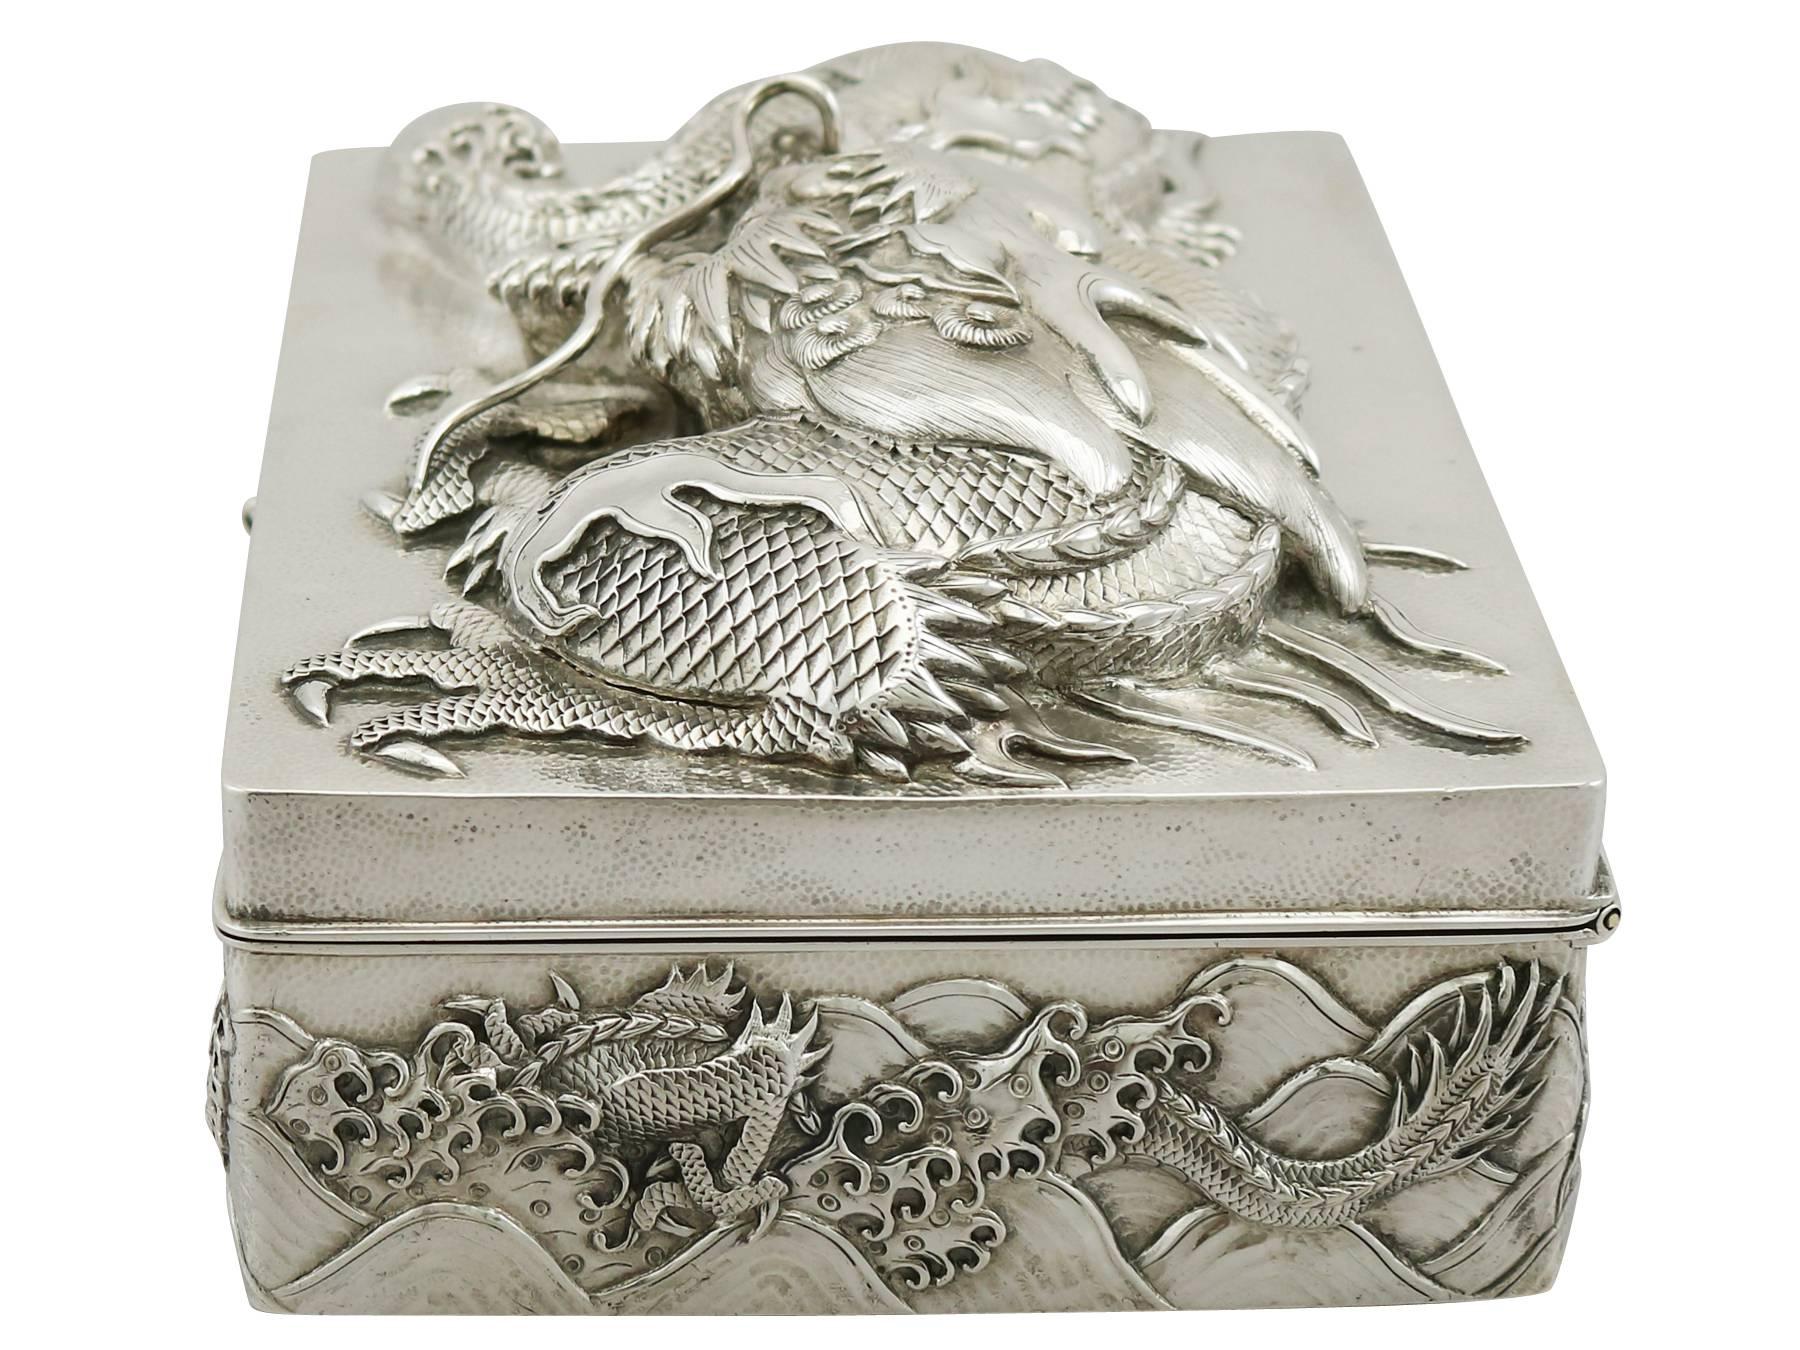 A magnificent, fine and impressive antique Chinese Export silver double skin box; an addition to our range of silver boxes and cases.

This magnificent antique Chinese silver box has a plain rectangular form.

The surface of the body is